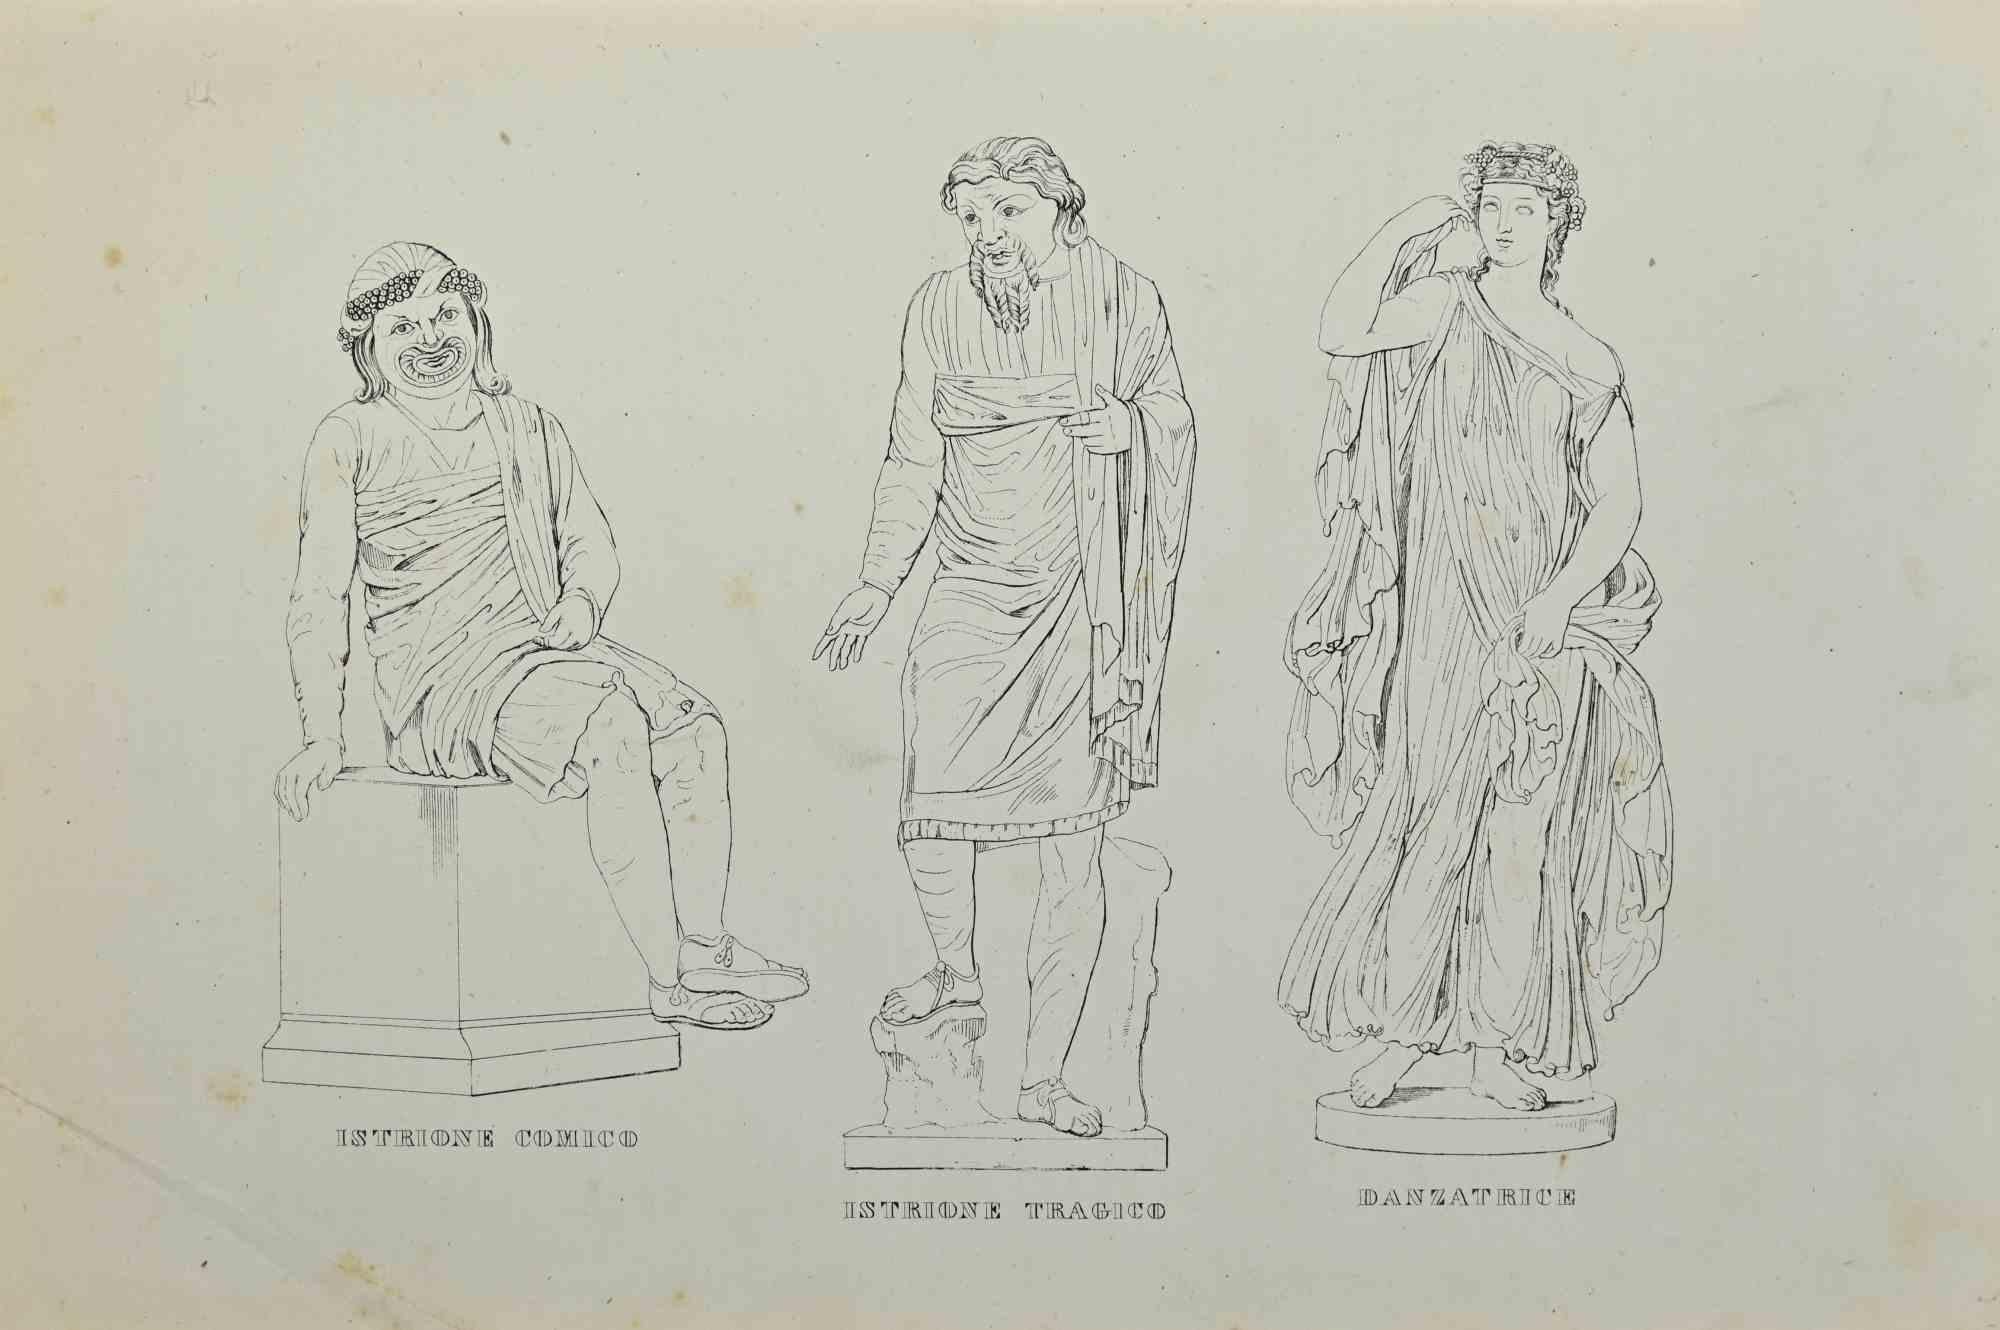 Various Artists Figurative Print - Uses and Customs - Roman Drama Personage - Lithograph - 1862